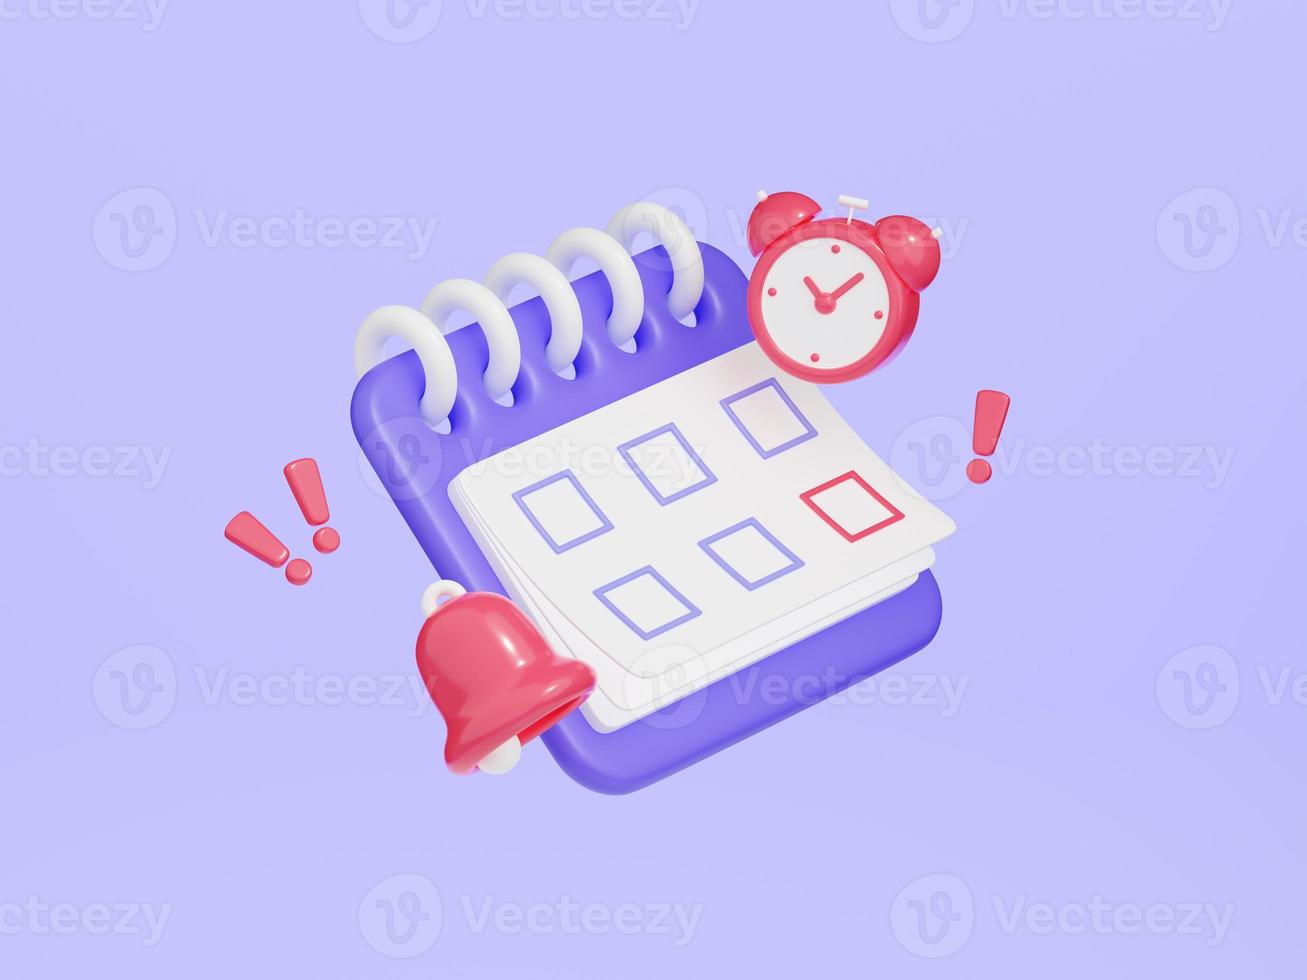 Calendar with clock and bell 3d render. Purple organizer with rings and week lined up floating near red watch and bell photo